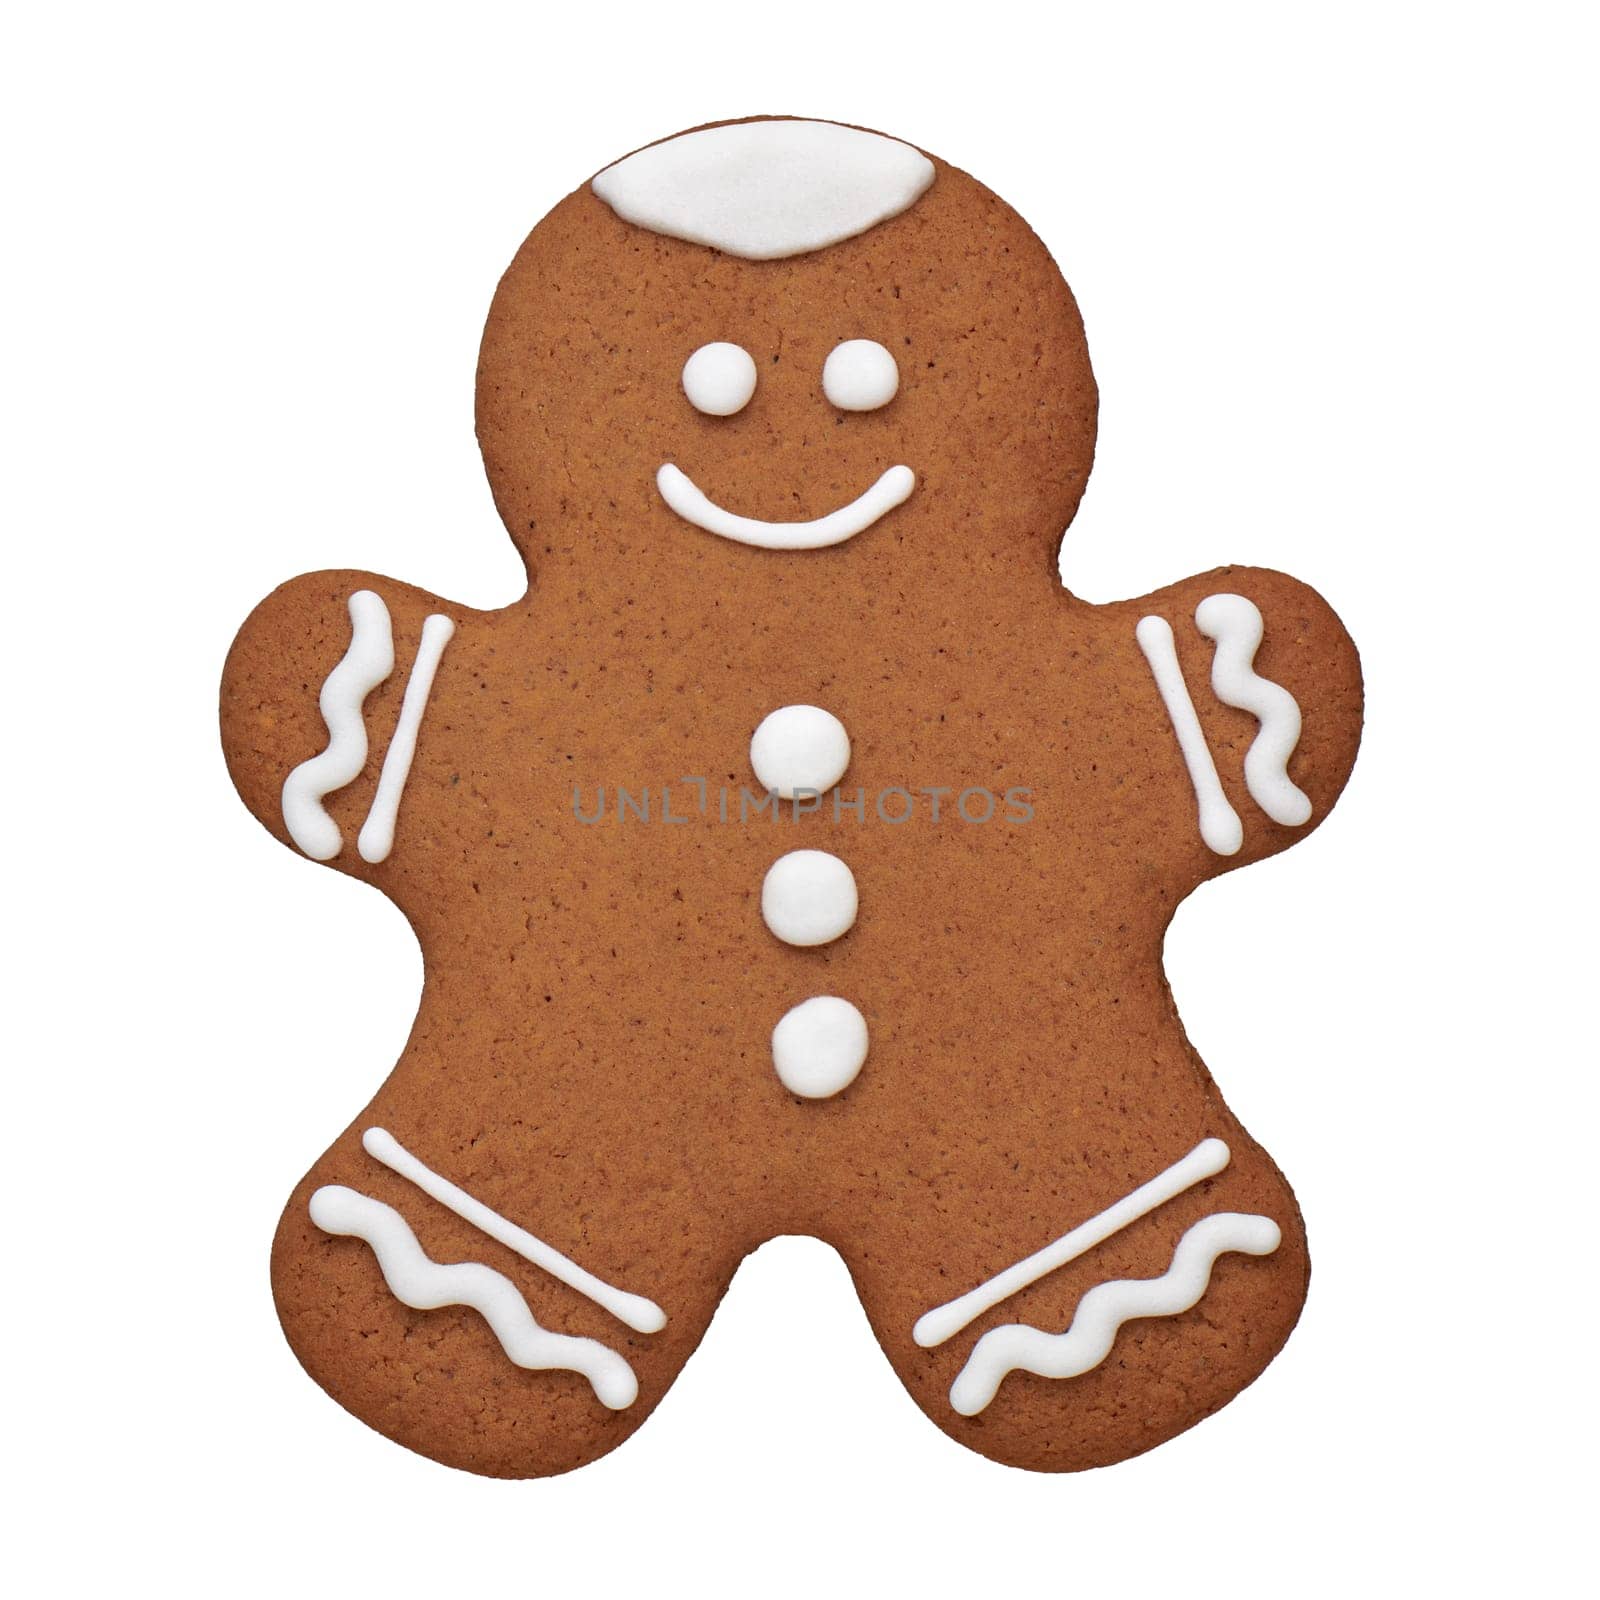 Hand painted gingerbread man cookie, cut out, isolated